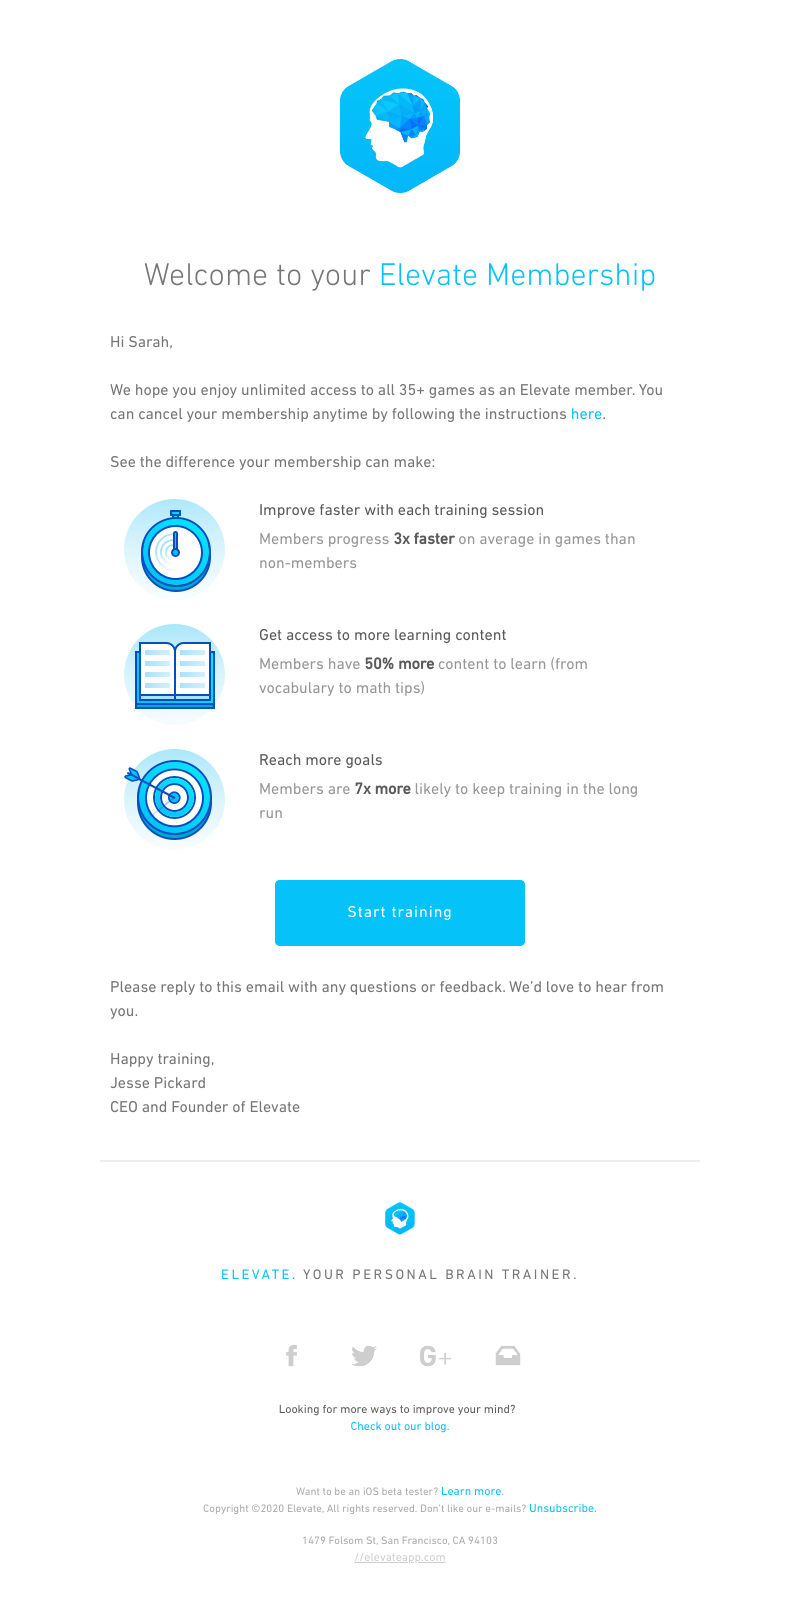 Screenshot of email with subject /media/emails/a9d9a6f2-b053-471e-99b9-517bfddefbd3.png